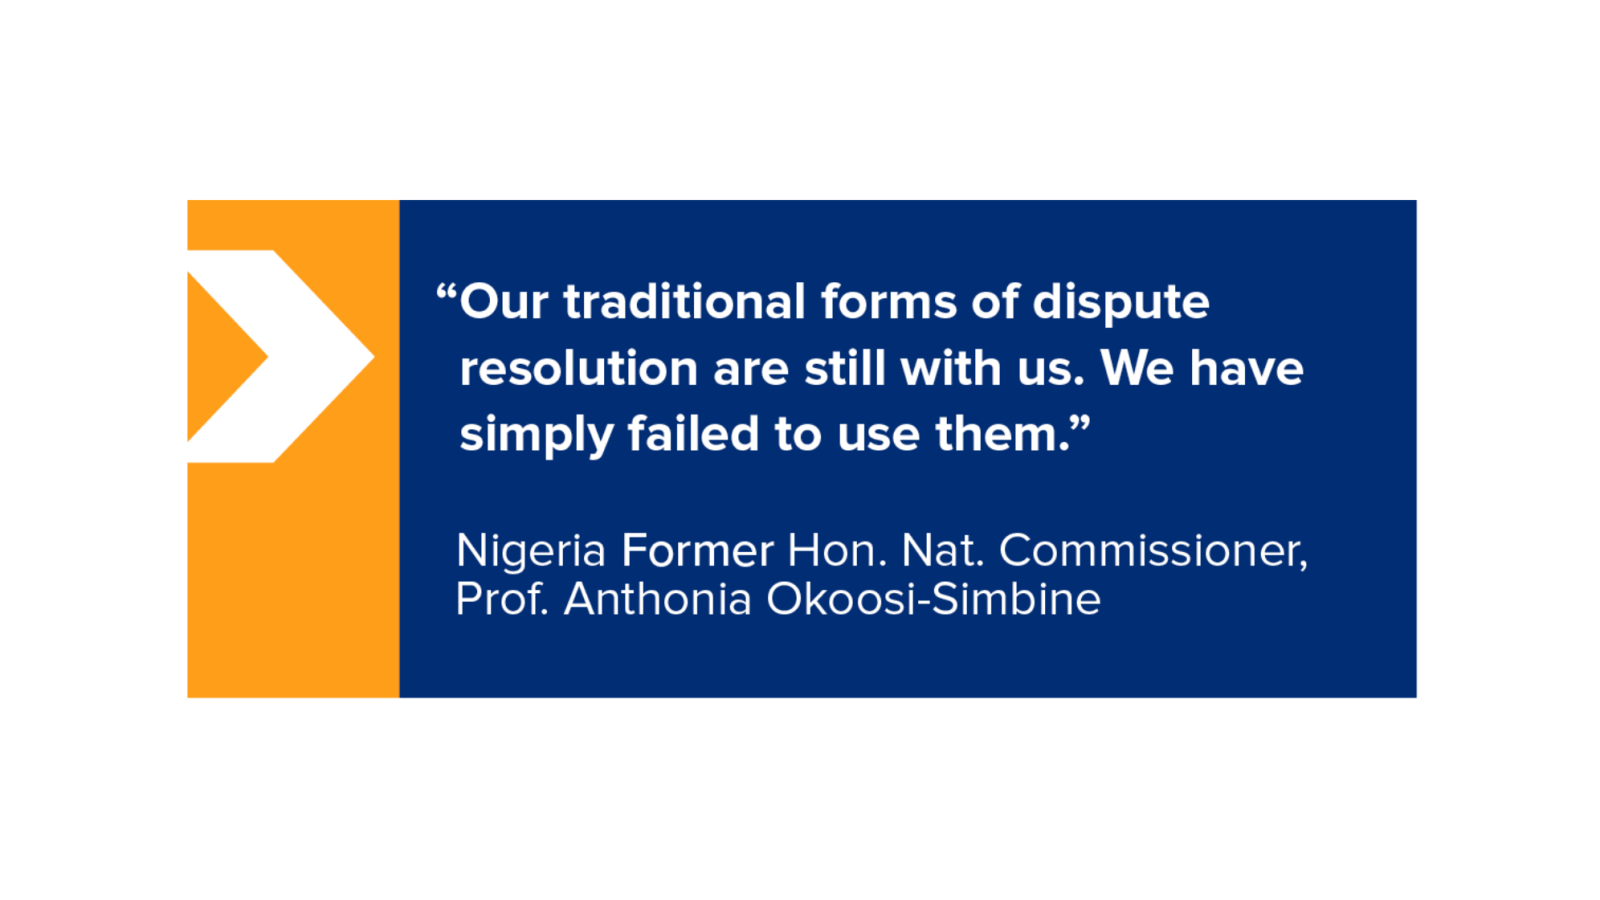 ﻿ "Our traditional forms of dispute resolution are still with us. We have simply failed to use them.” Nigeria Former Hon. Nat. Commissioner, Prof. Anthonia Okoosi-Simbine